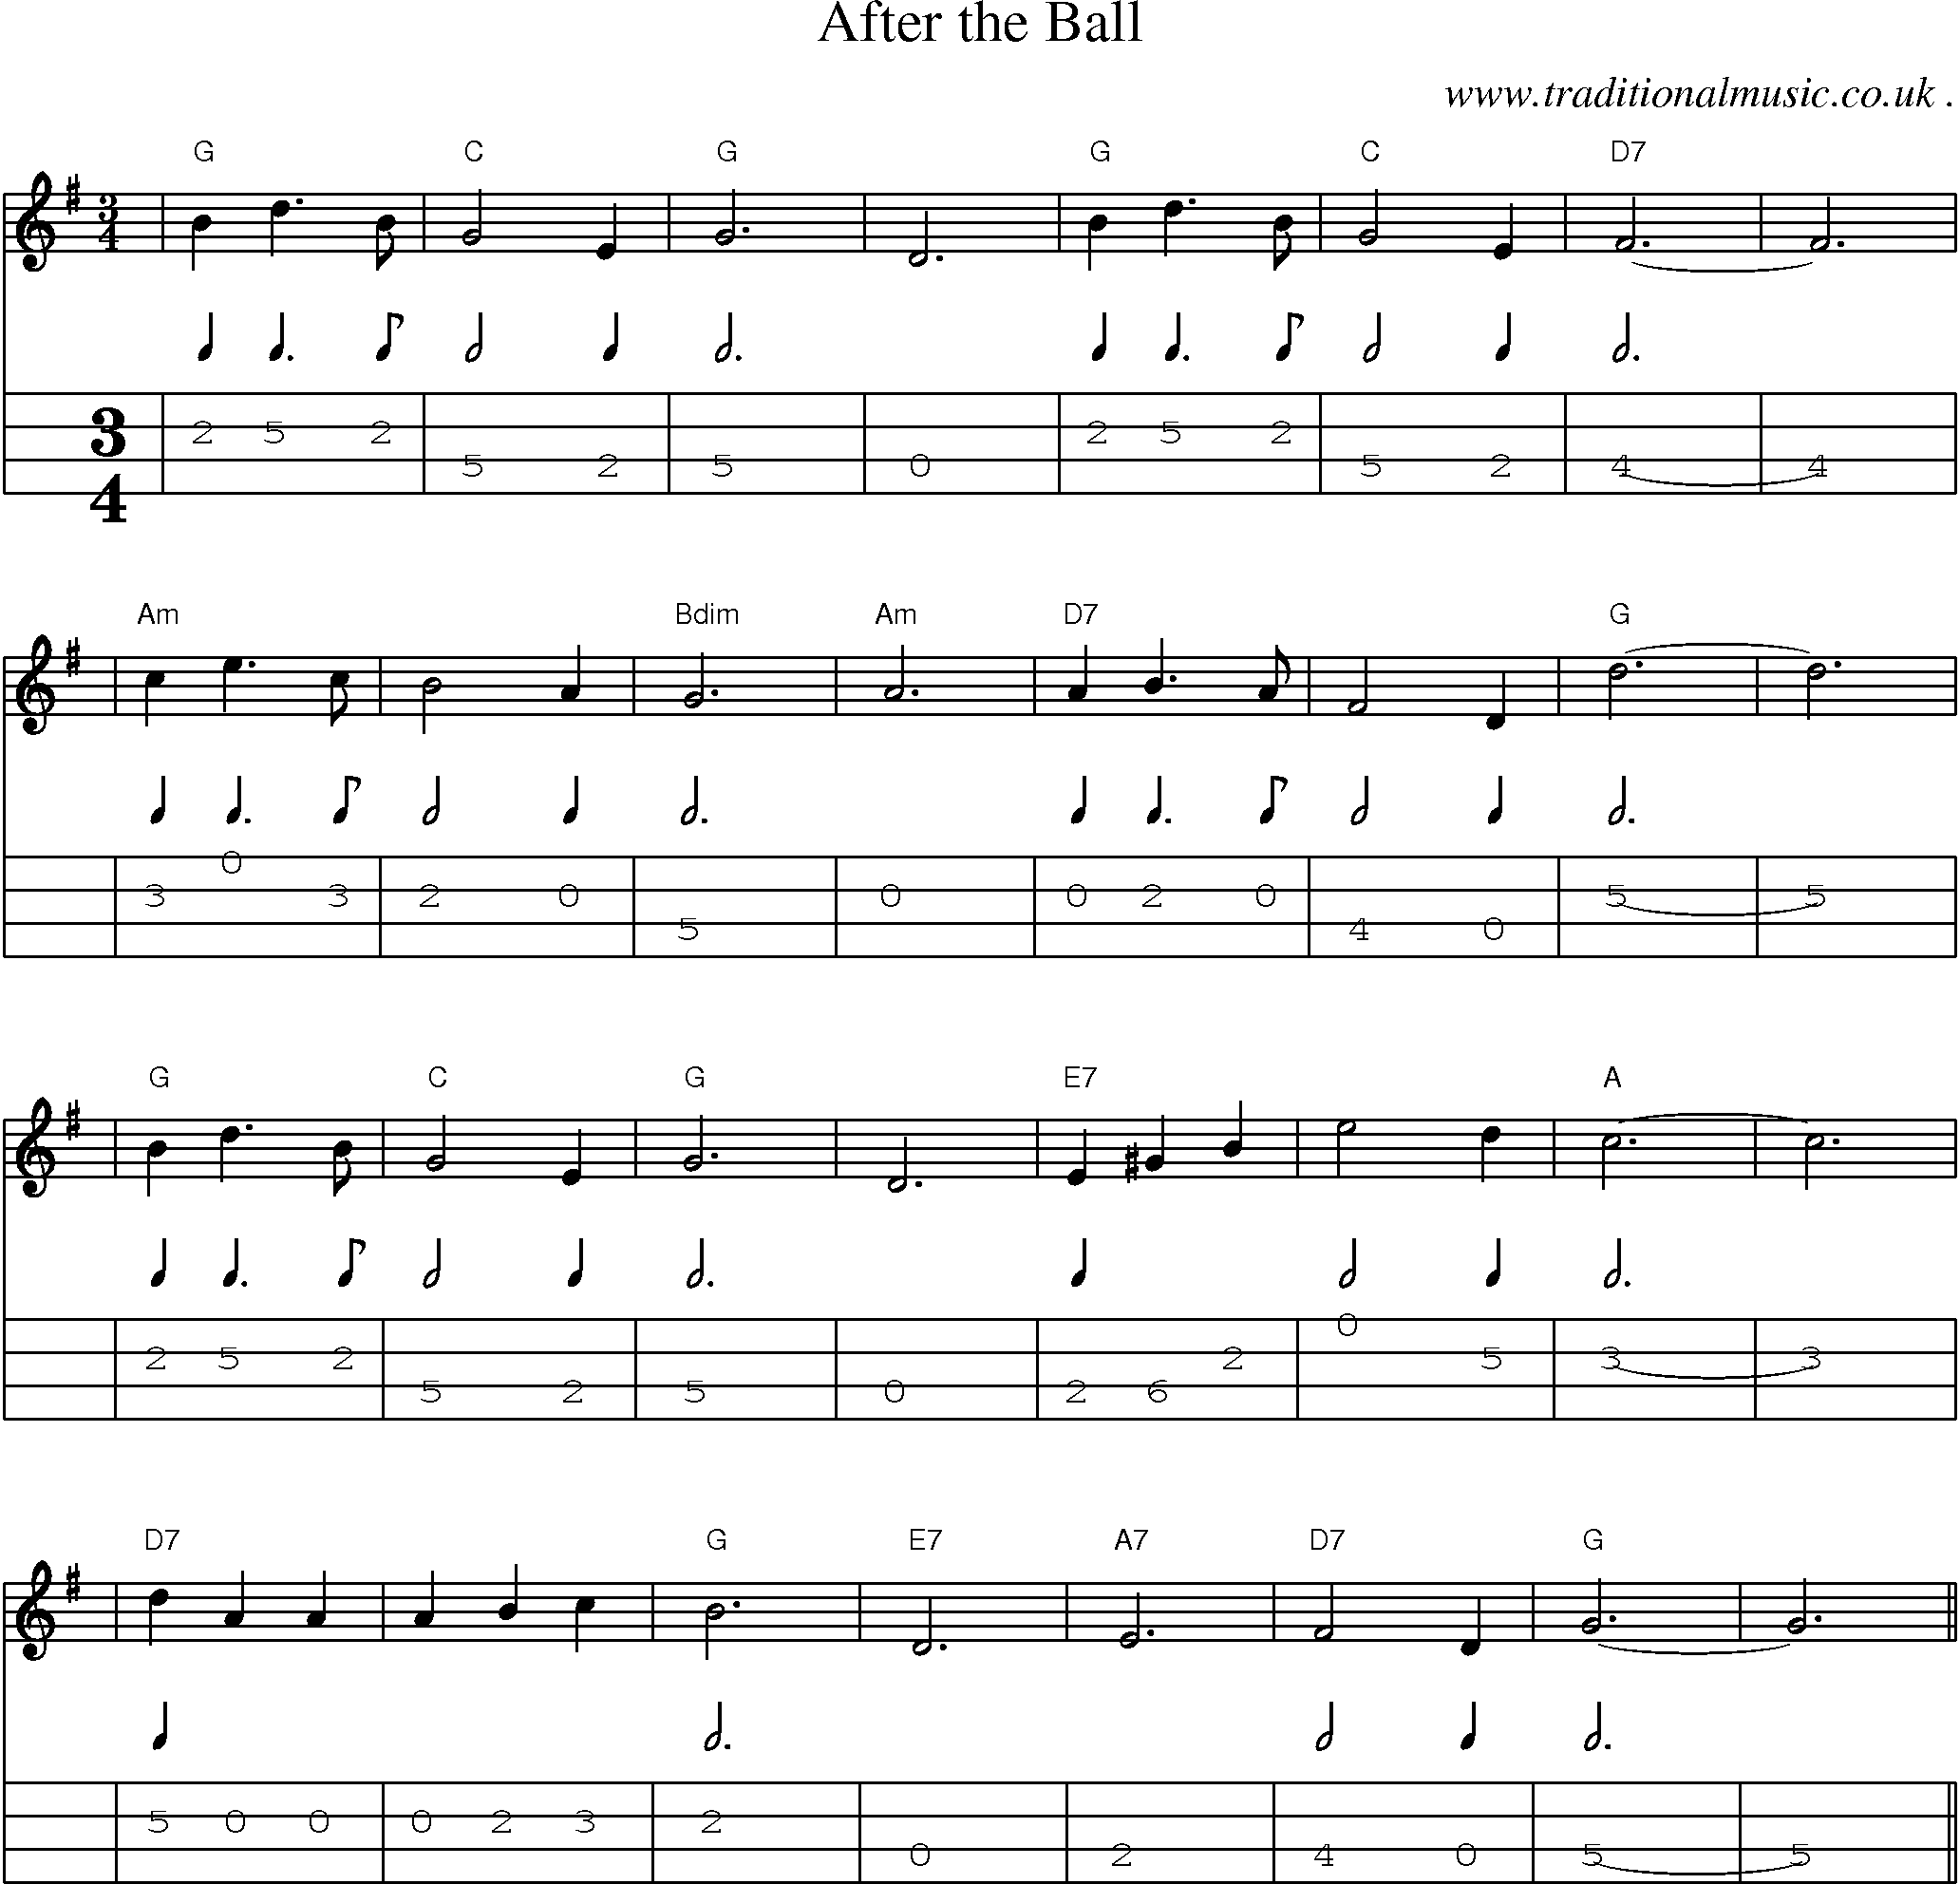 Music Score and Mandolin Tabs for After The Ball